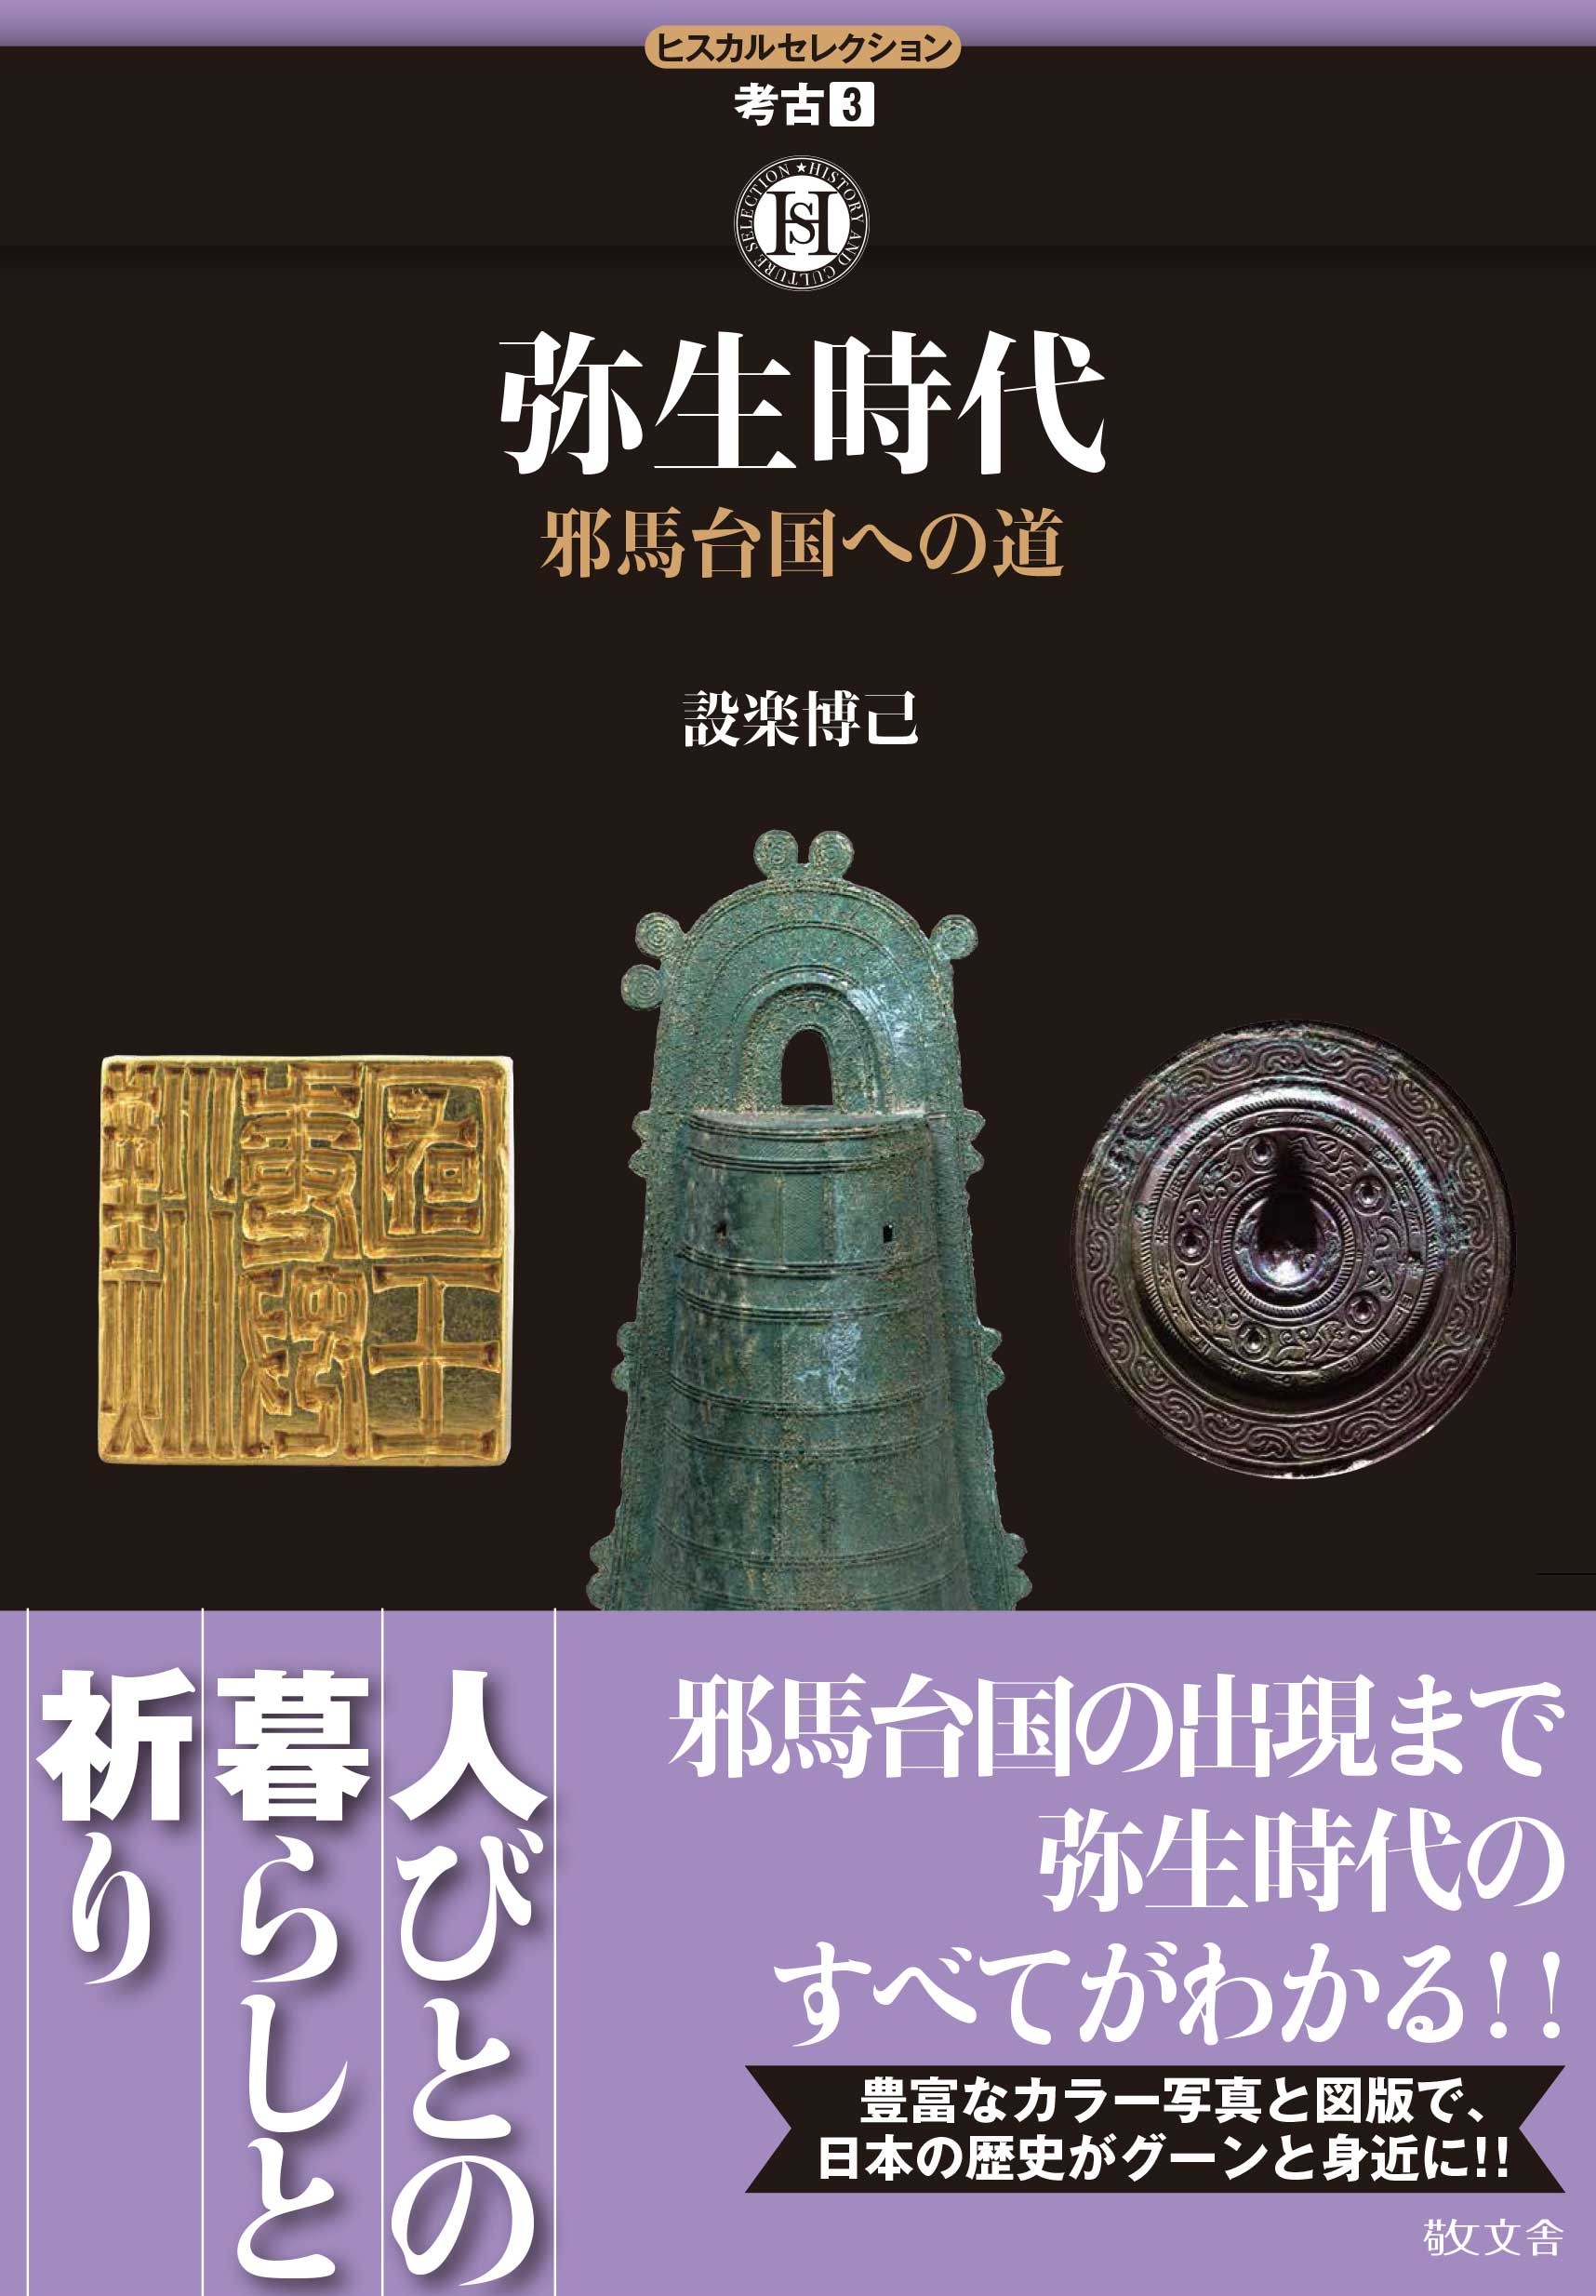 a picture of gold seal, bell, bronze mirror